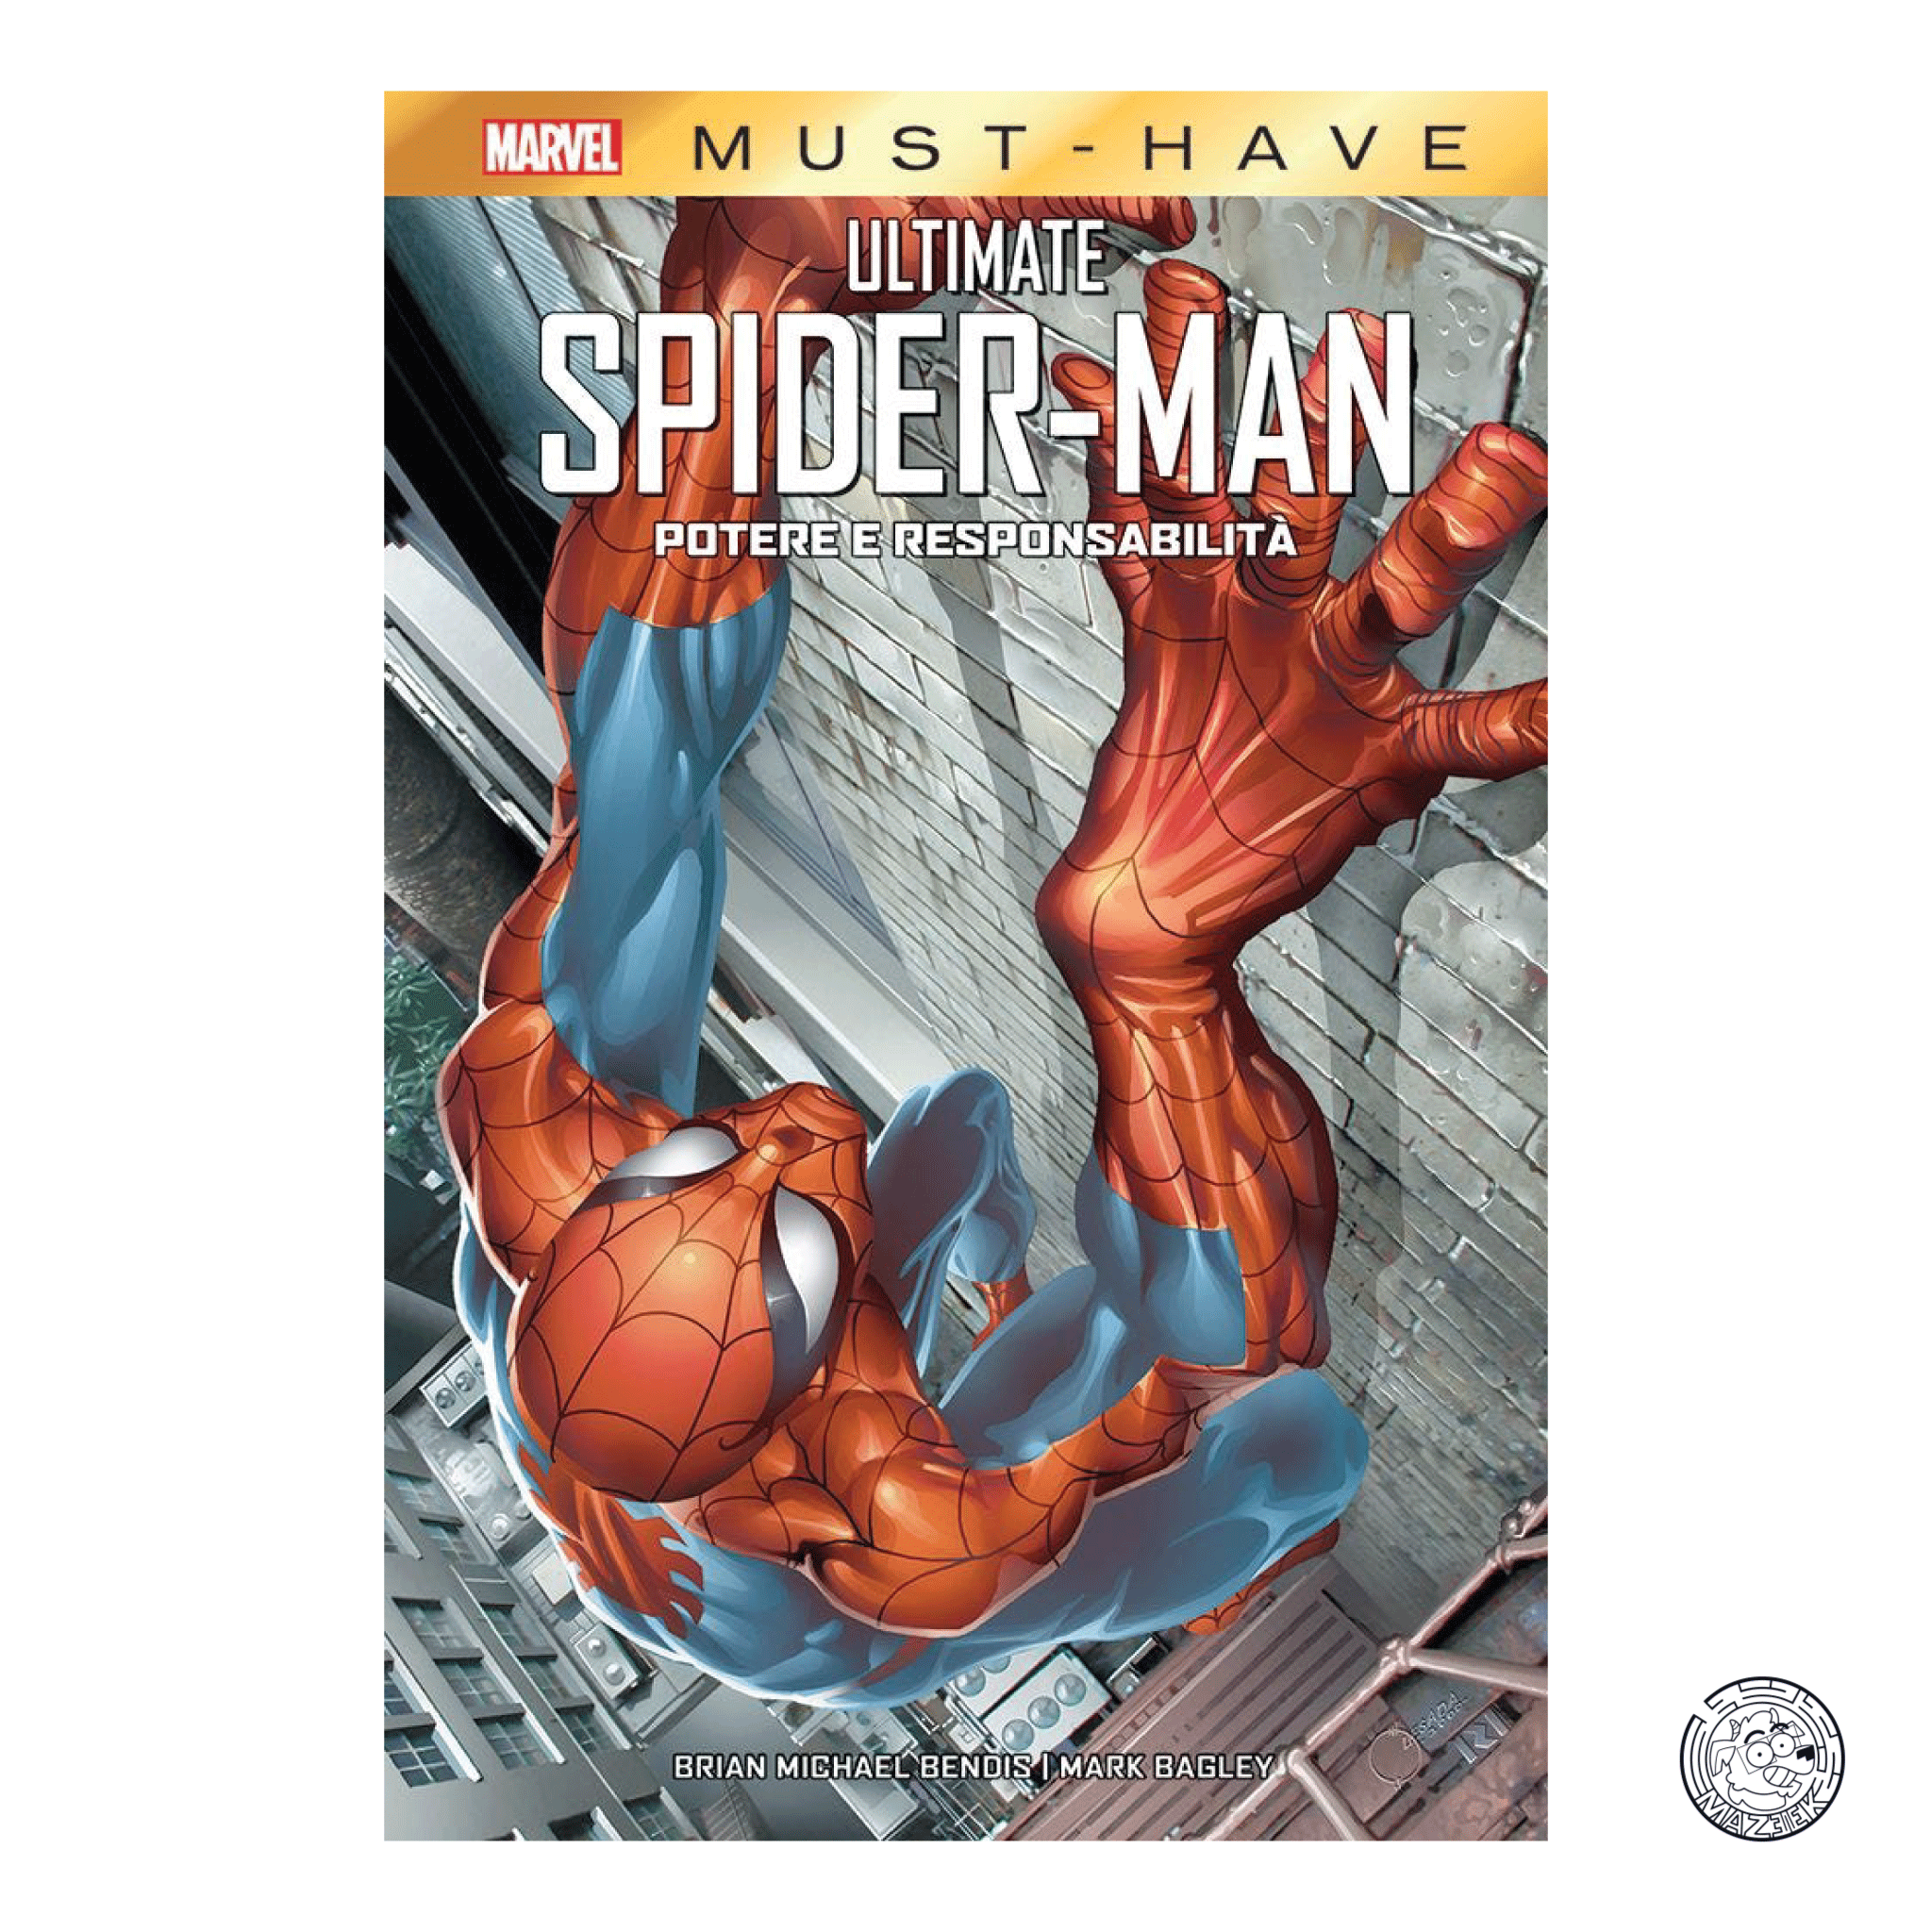 Must-Have - Ultimate Spider-man Power and Responsibility